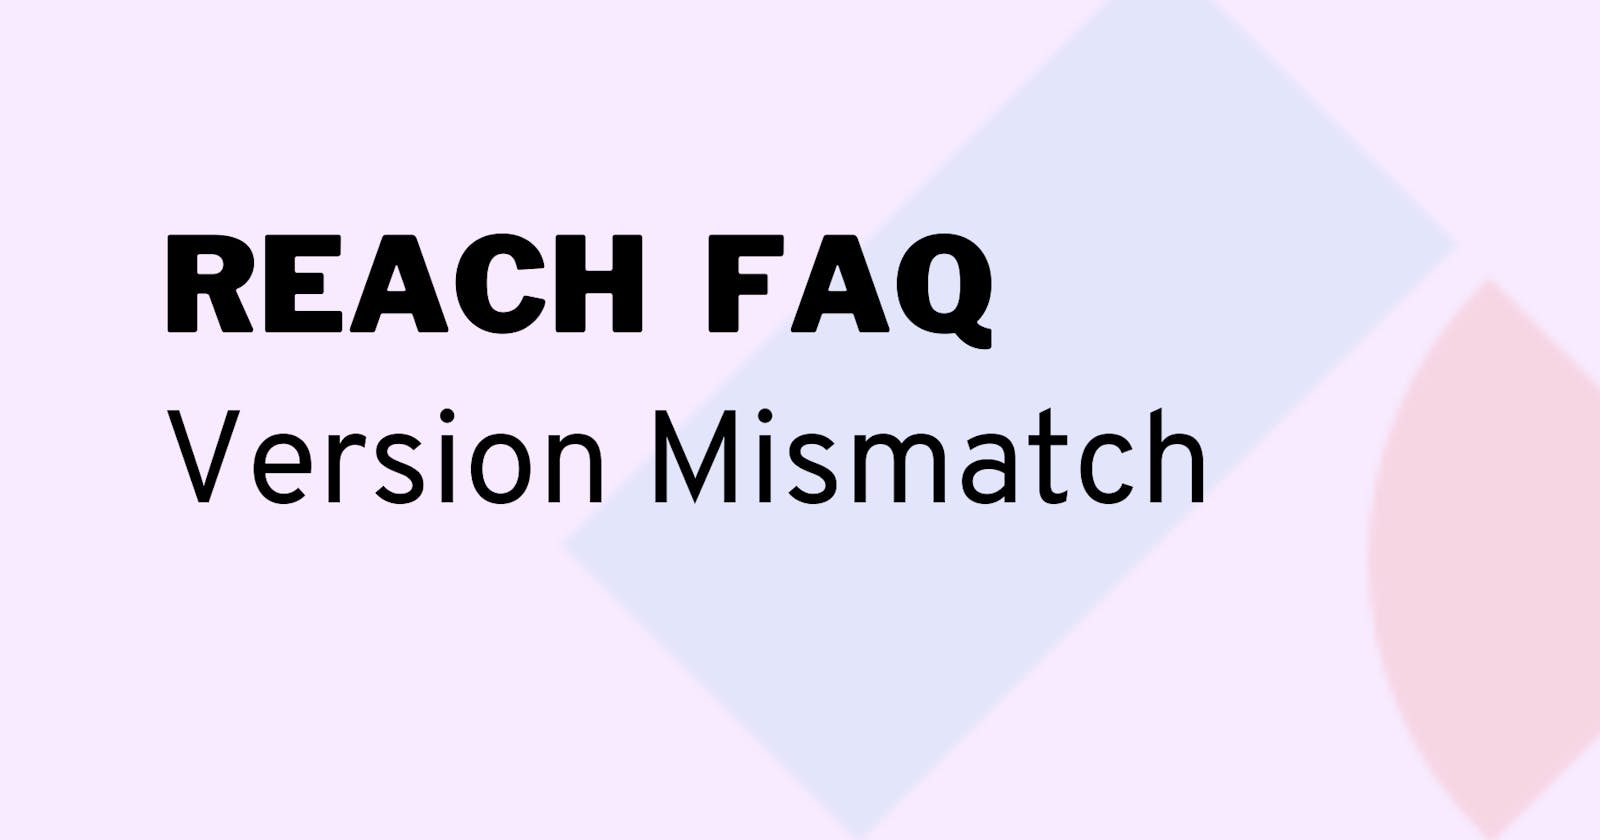 Reach: What to do when my version mismatches?